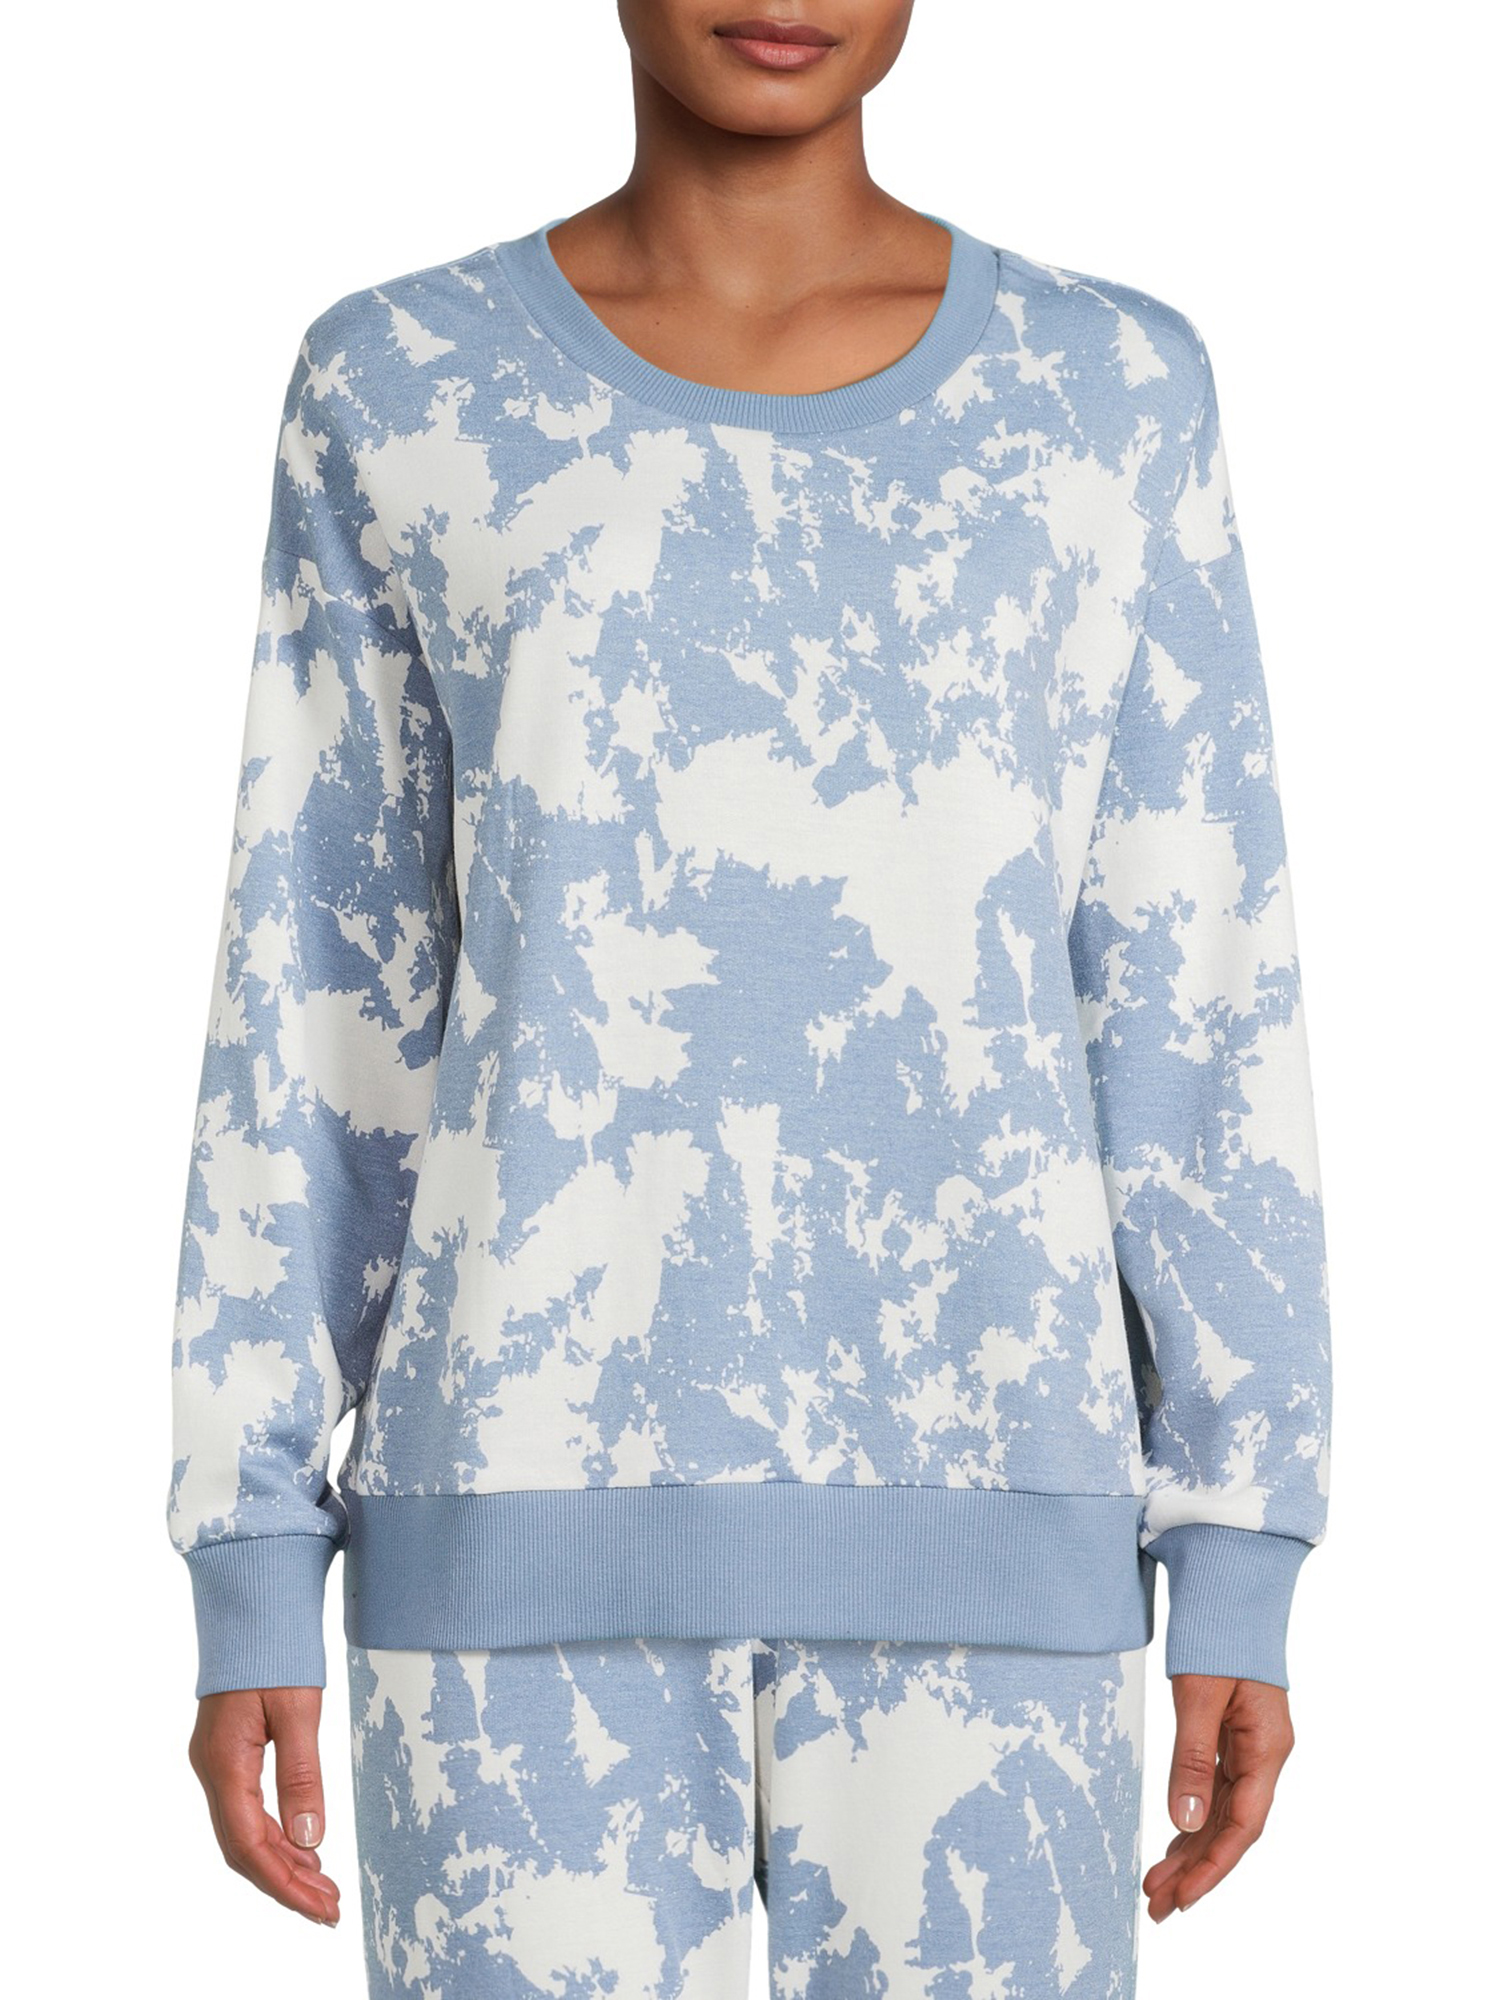 Reebok Long Sleeve Pullover Relaxed Fit Sweatshirt (Women's) 1 Pack - image 1 of 6